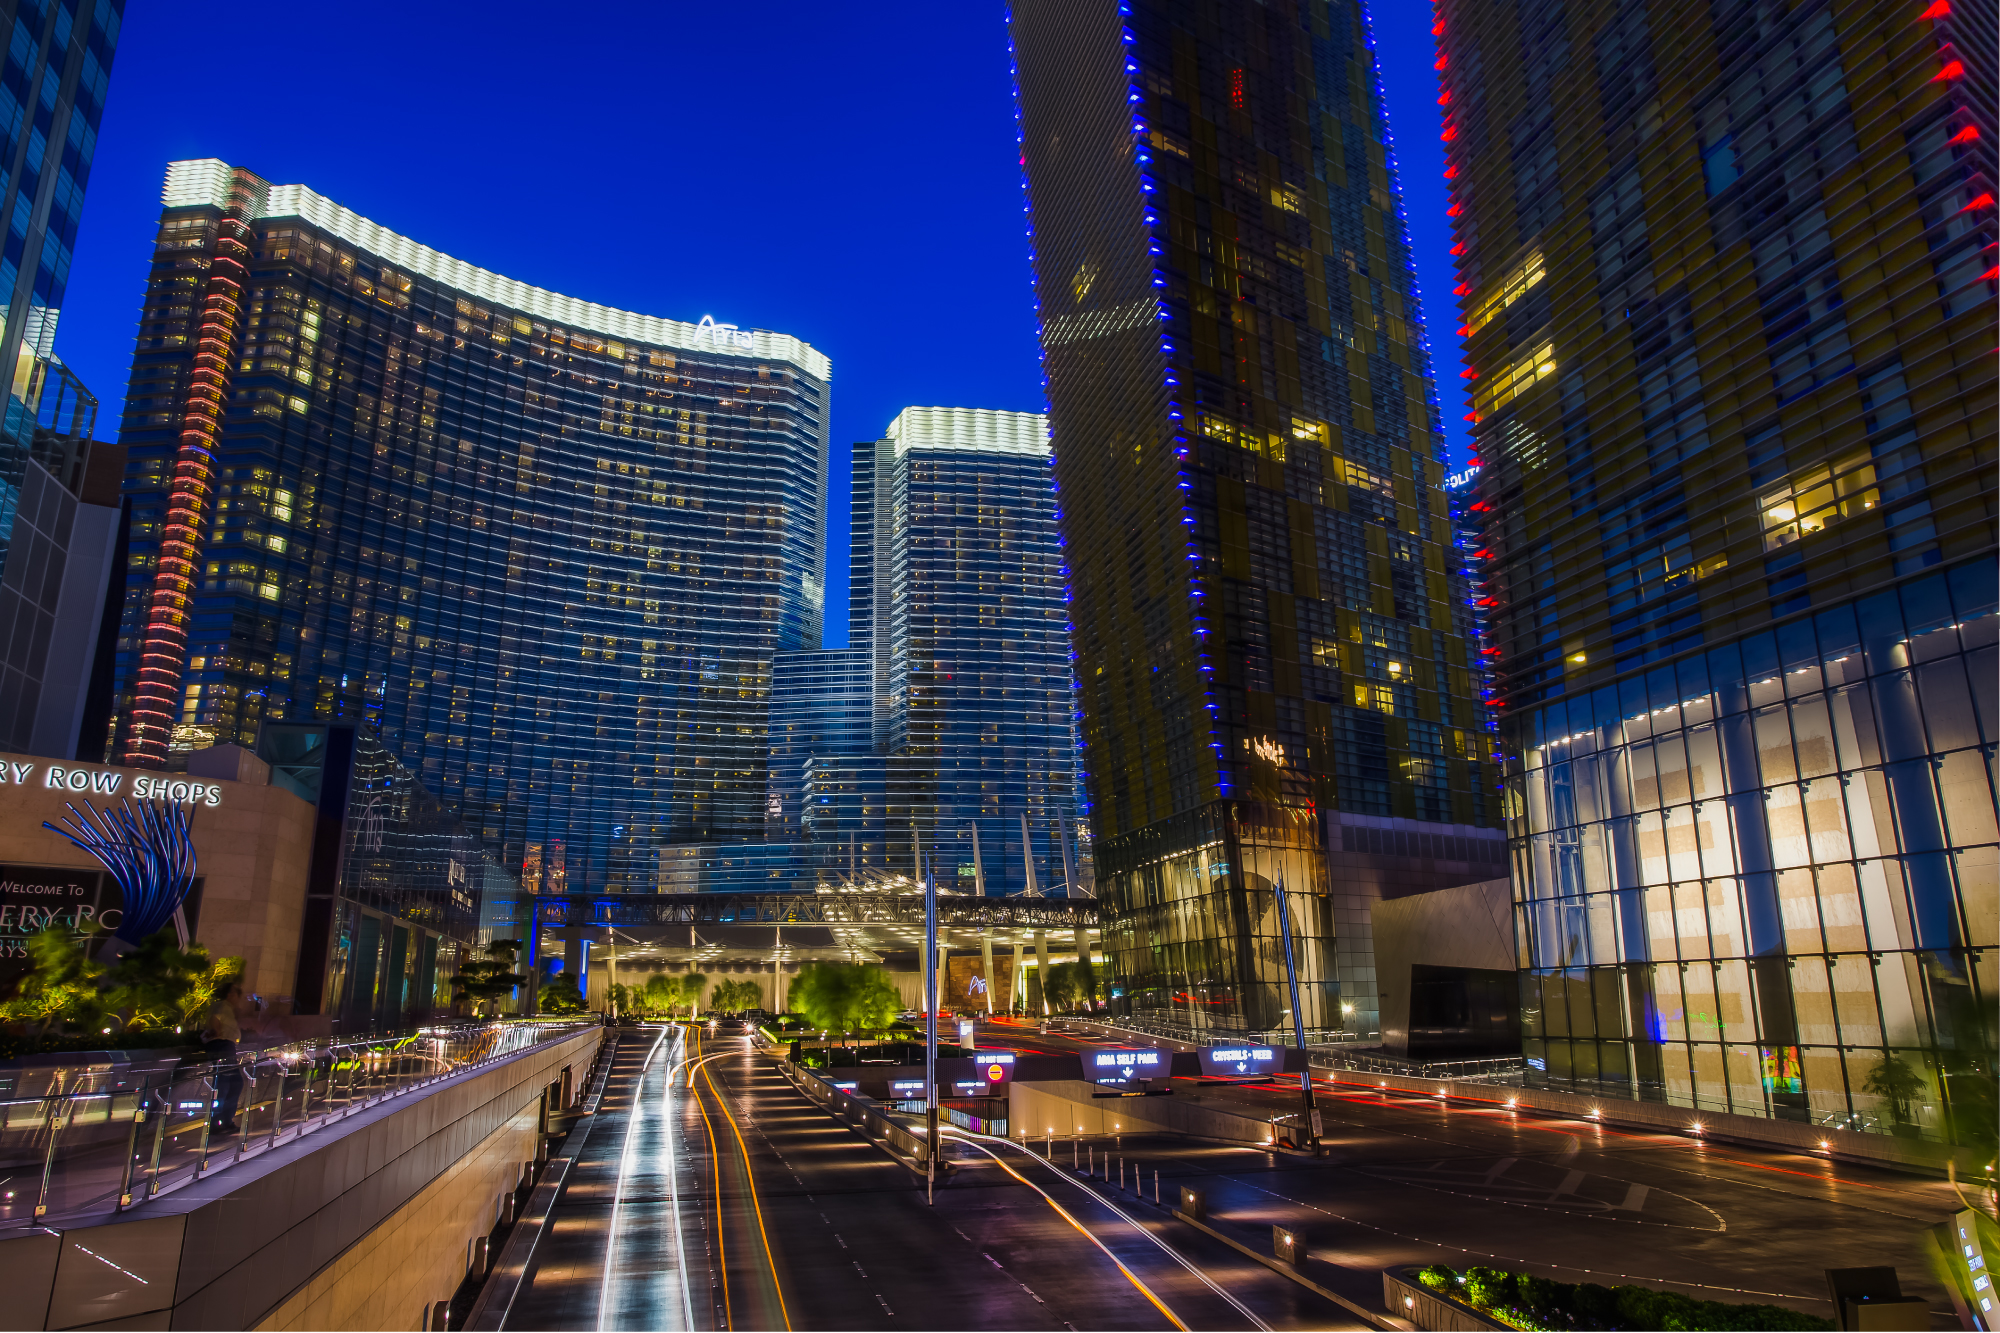 HDR Photography Workshop: Las Vegas Aria HDR | Pt.3 | HDR Processing